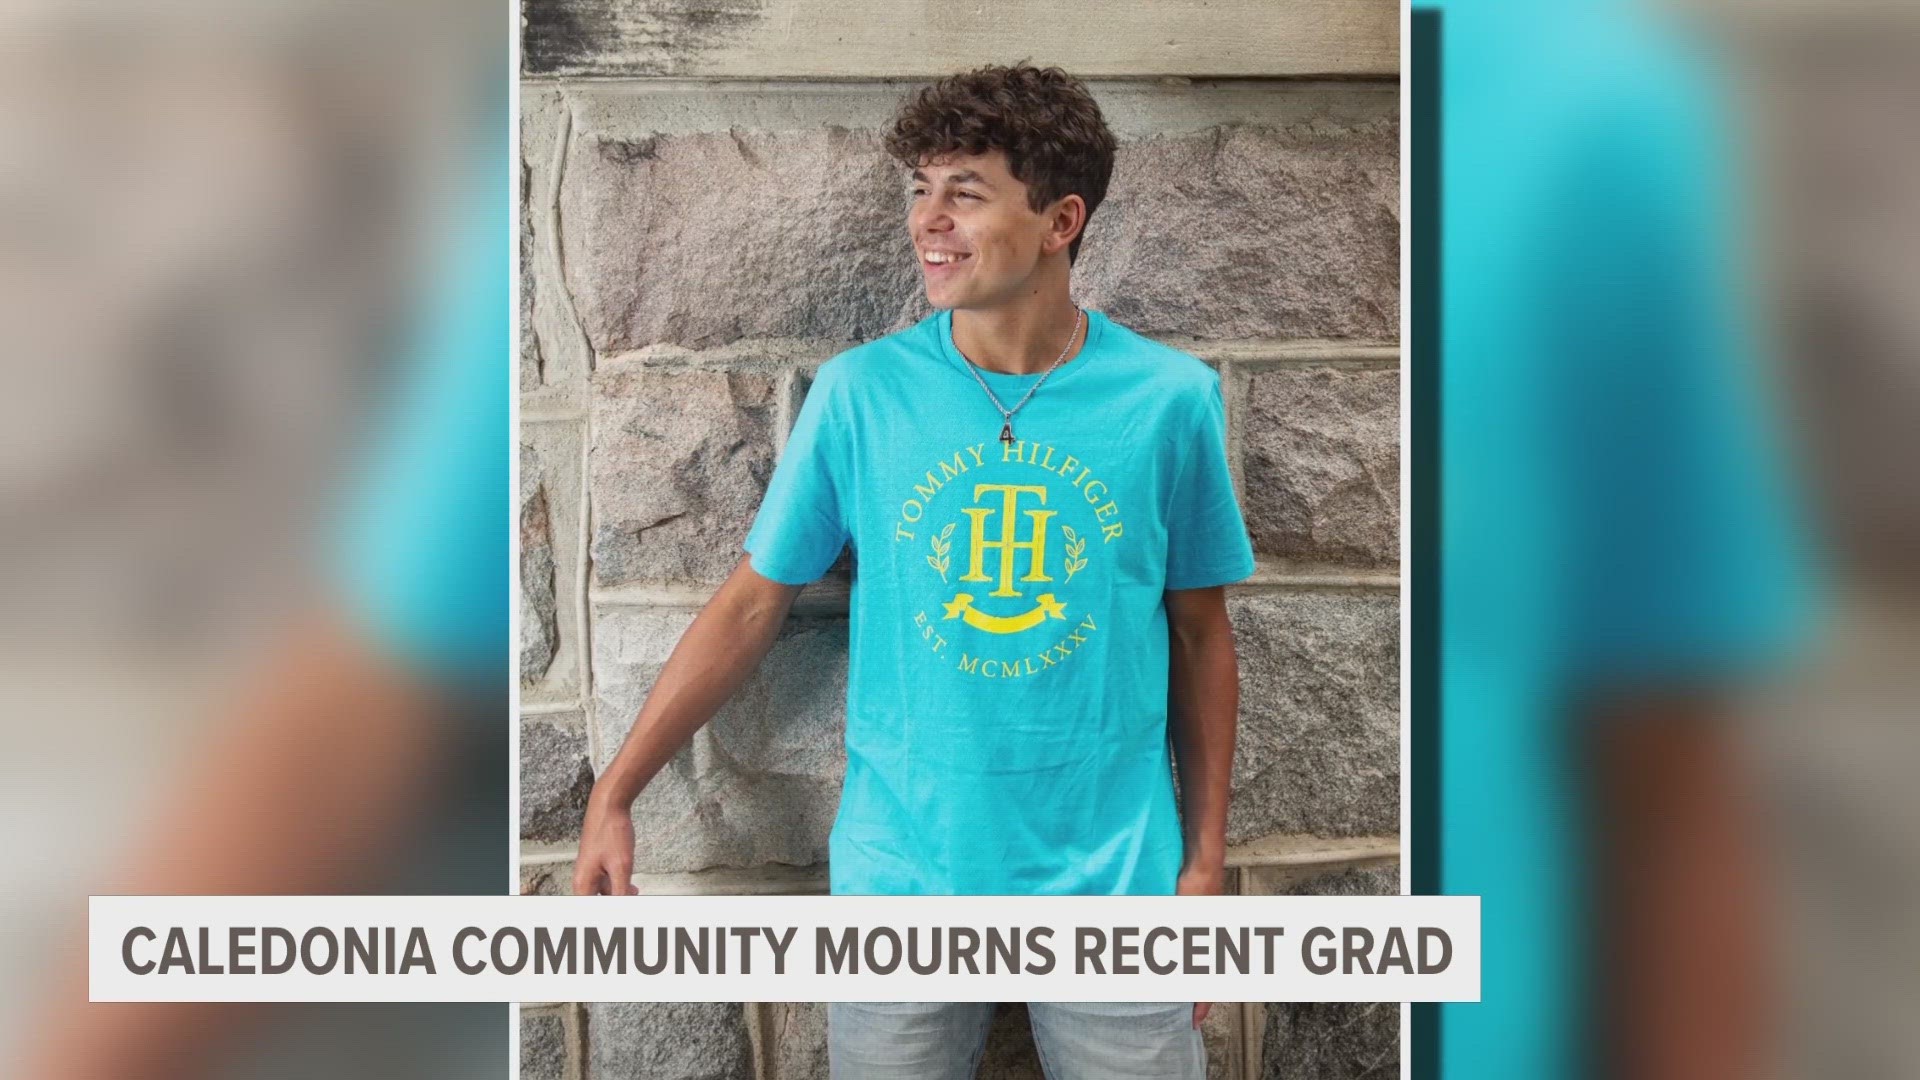 18-year-old Elijah Holt graduated from Caledonia this year. On Instagram, Caledonia Athletics posted about his death, saying, "Today CHS lost a good one."